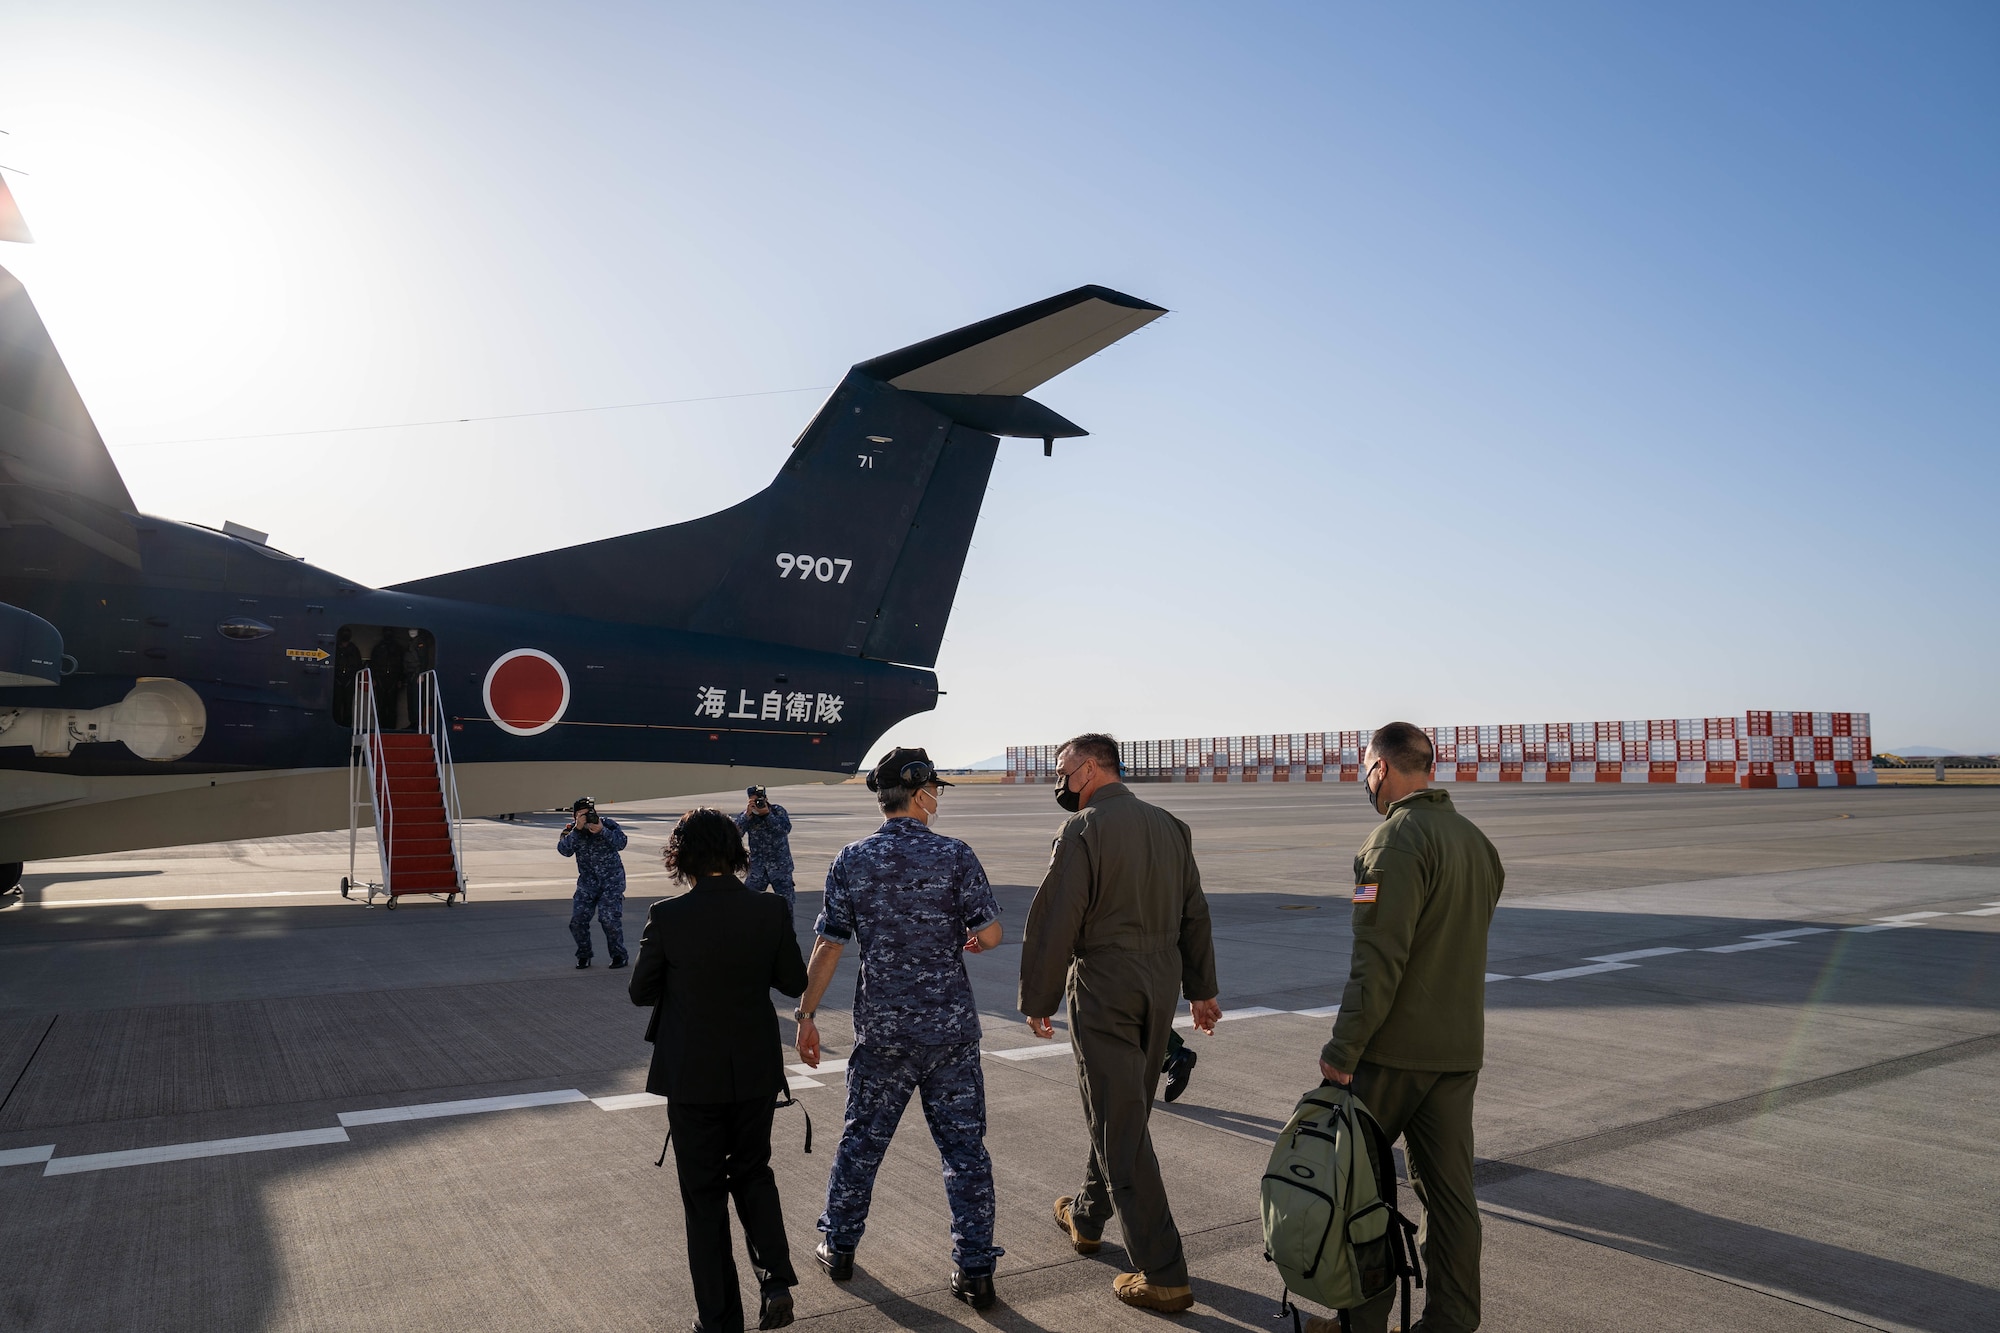 U.S. Air Force Maj. Gen. Eric Hill, deputy commander of Air Force Special Operations Command, center right, and Maj. Gen. Leonard Kosinski, 5th Air Force deputy commander, far right, board a ShinMaywa US-2 assigned to the Japanese Maritime Self-Defense Force's Air Patrol Squadron 71 at Marines Corps Air Station Iwakuni, Japan, April 5, 2022. During the visit the generals were able to witness the unique search, rescue, and personnel recovery capabilities the amphibious aircraft delivers firsthand. (U.S. Air Force photo by Capt. Joshua Thompson)